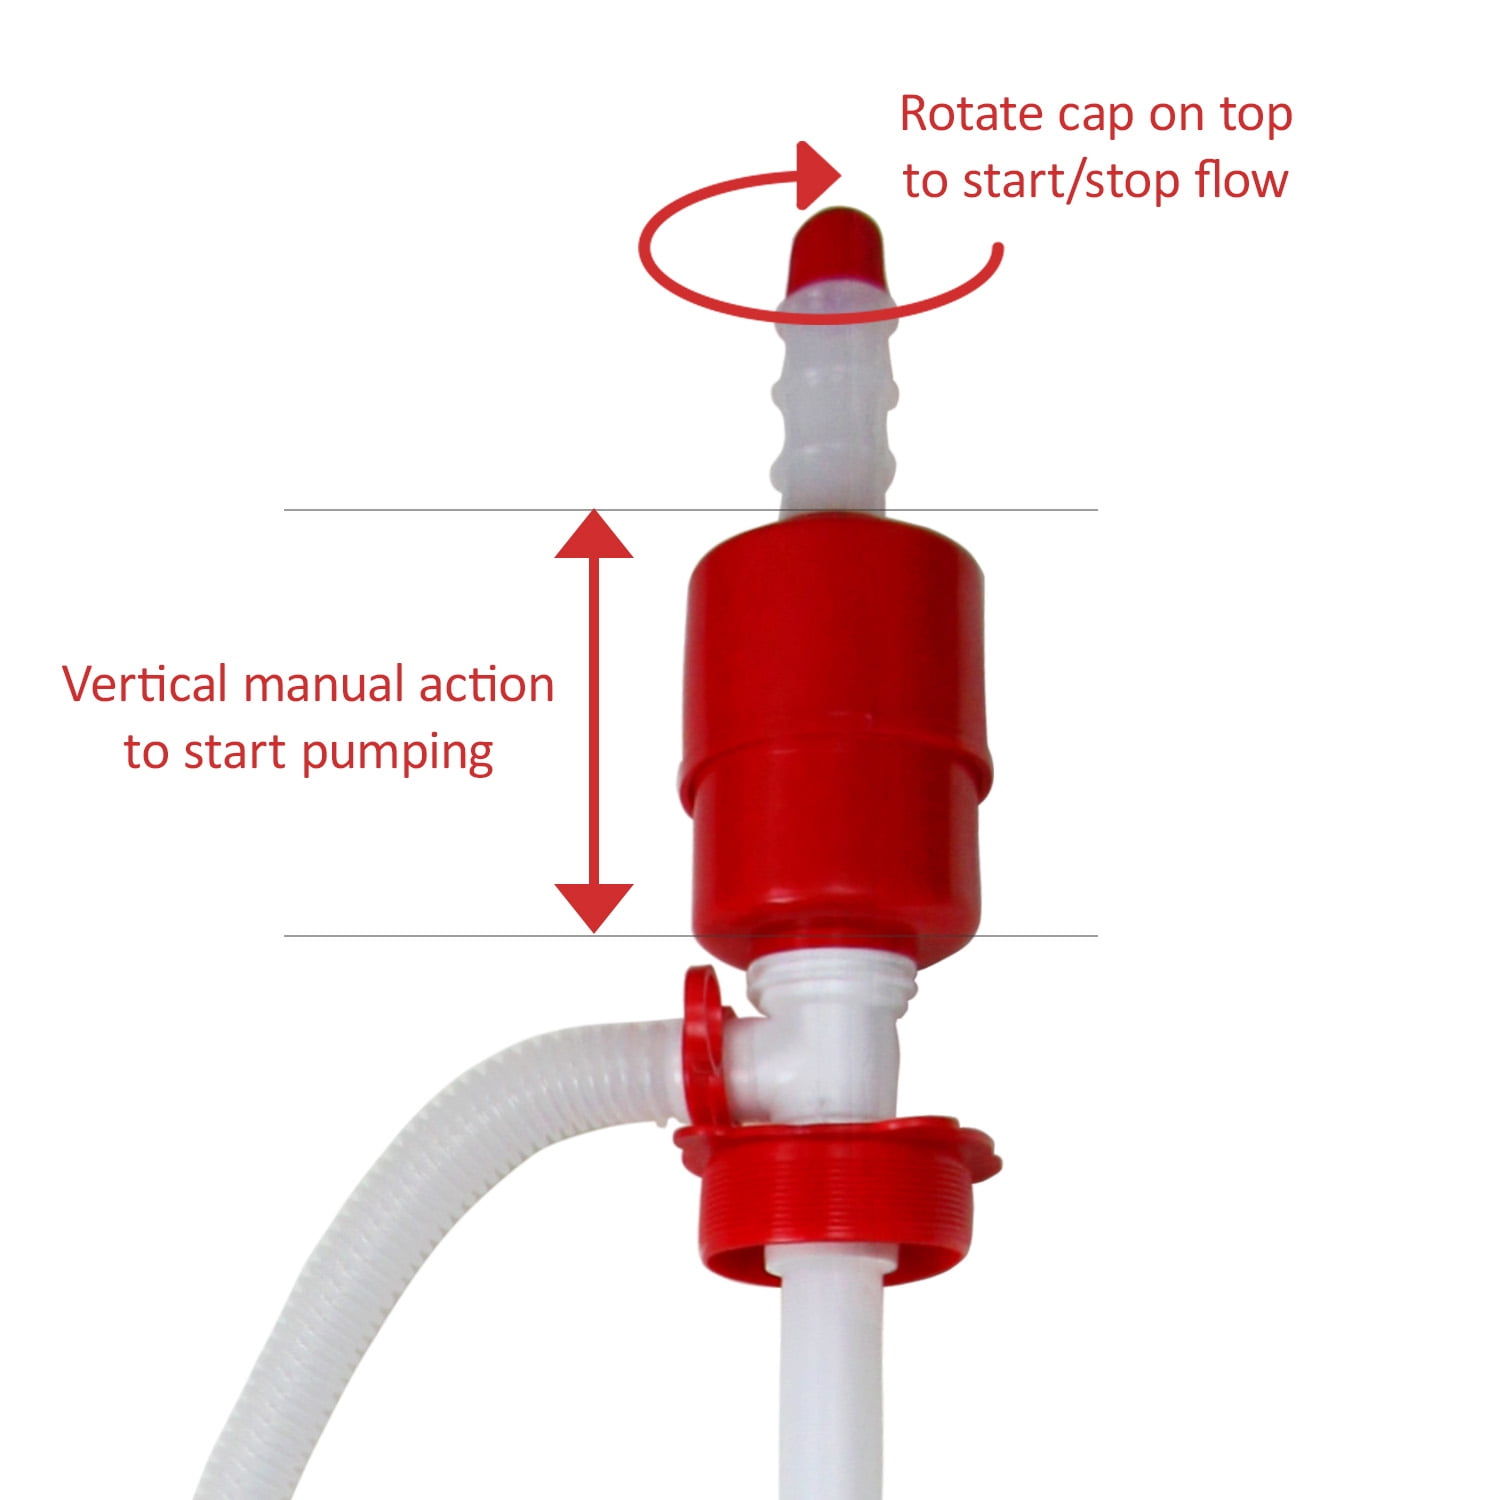 JOR Turtle Tank Siphon, Manual Hand Pump for Aquarium Water Change, Quick  to Assemble & Easy to Use, Includes Flexible Standard Tubing, Netted